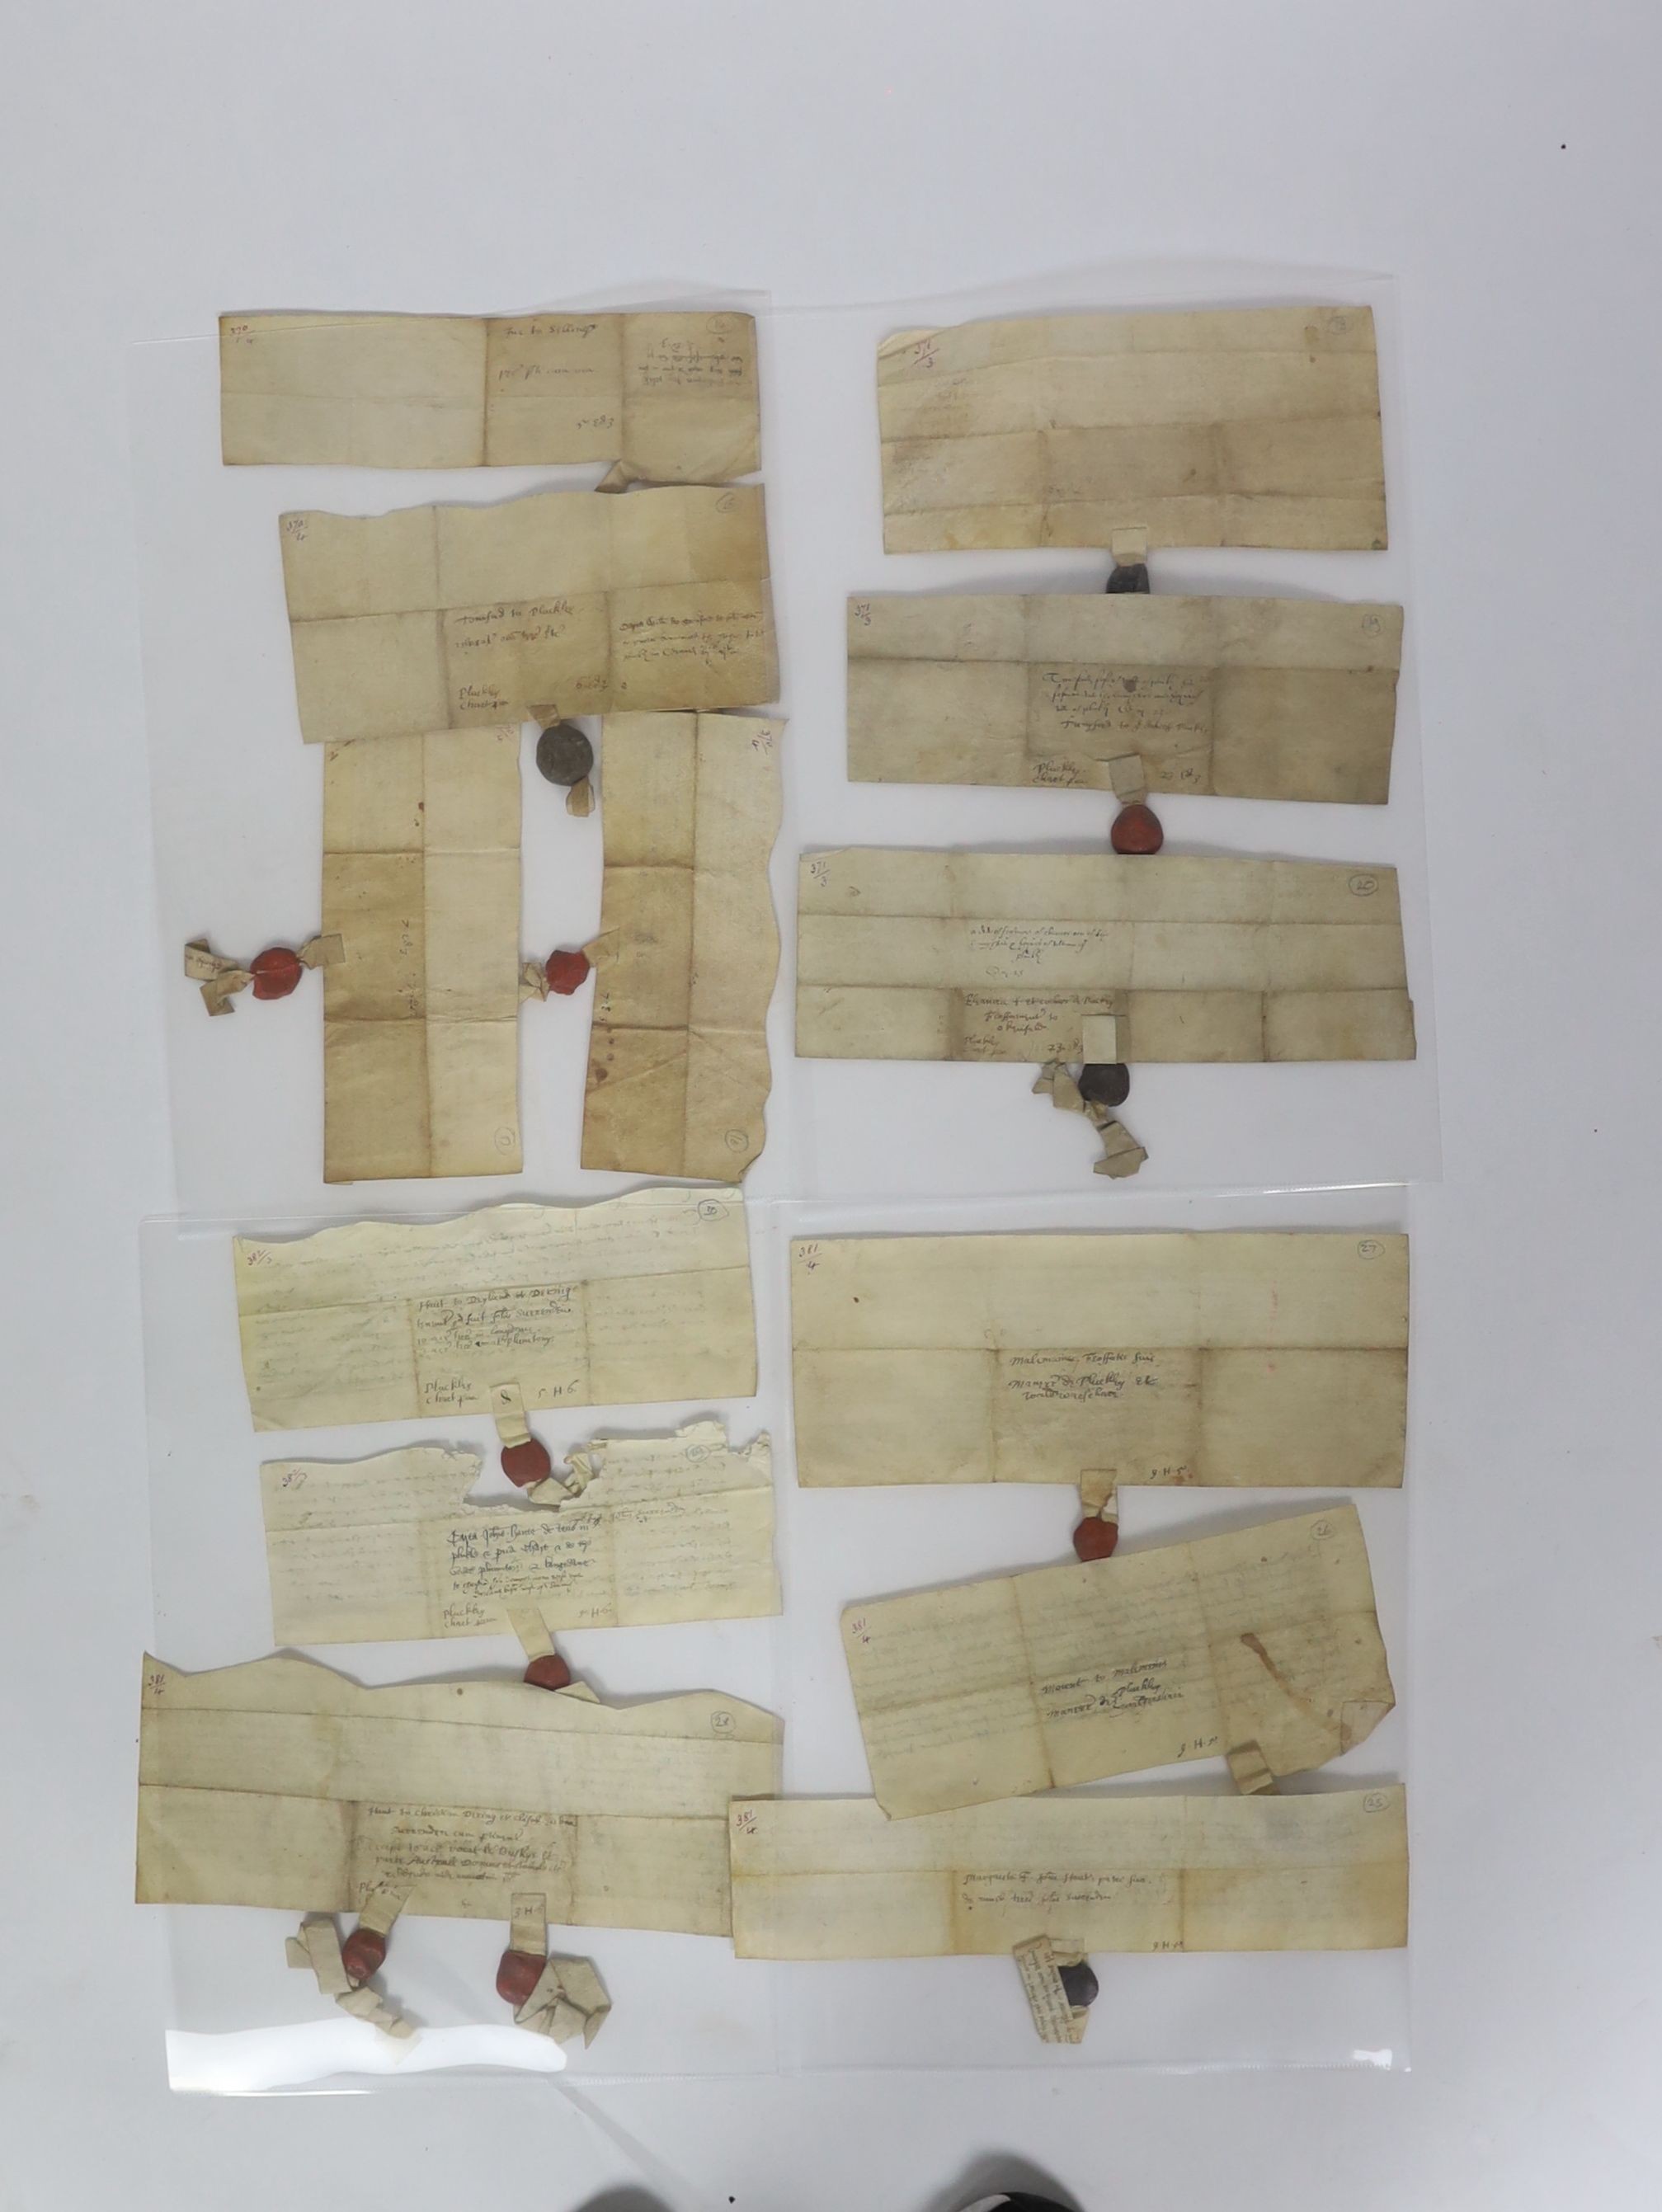 A Collection of deeds and documents relating chiefly to Kent, 1264-1654, from the collection of Thomas Godfrey Godfrey-Faussett (1829-1877)